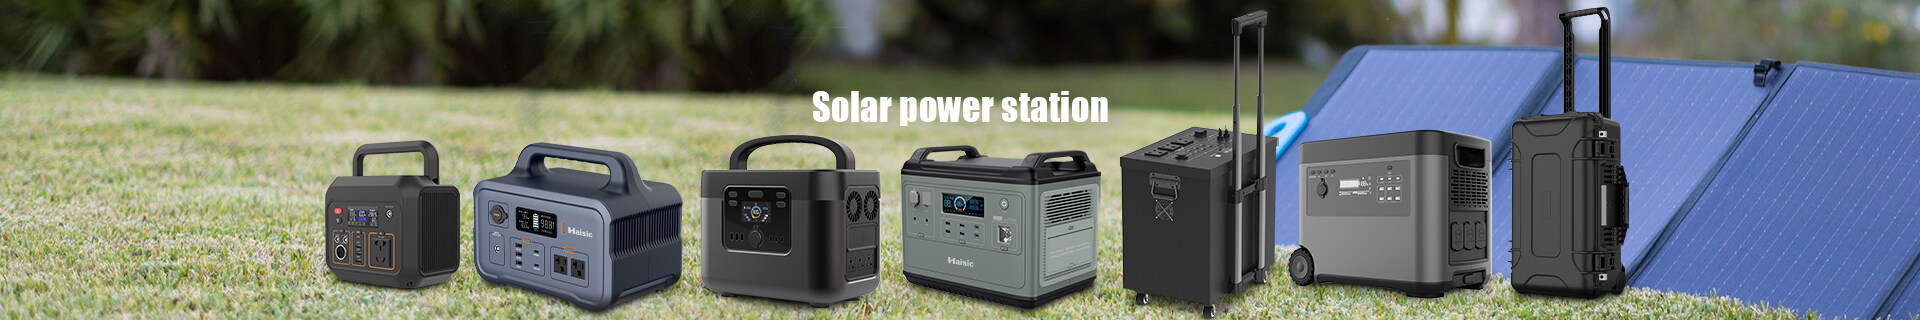 portable power station suppliers ,portable power station manufacturer, portable power station supplier